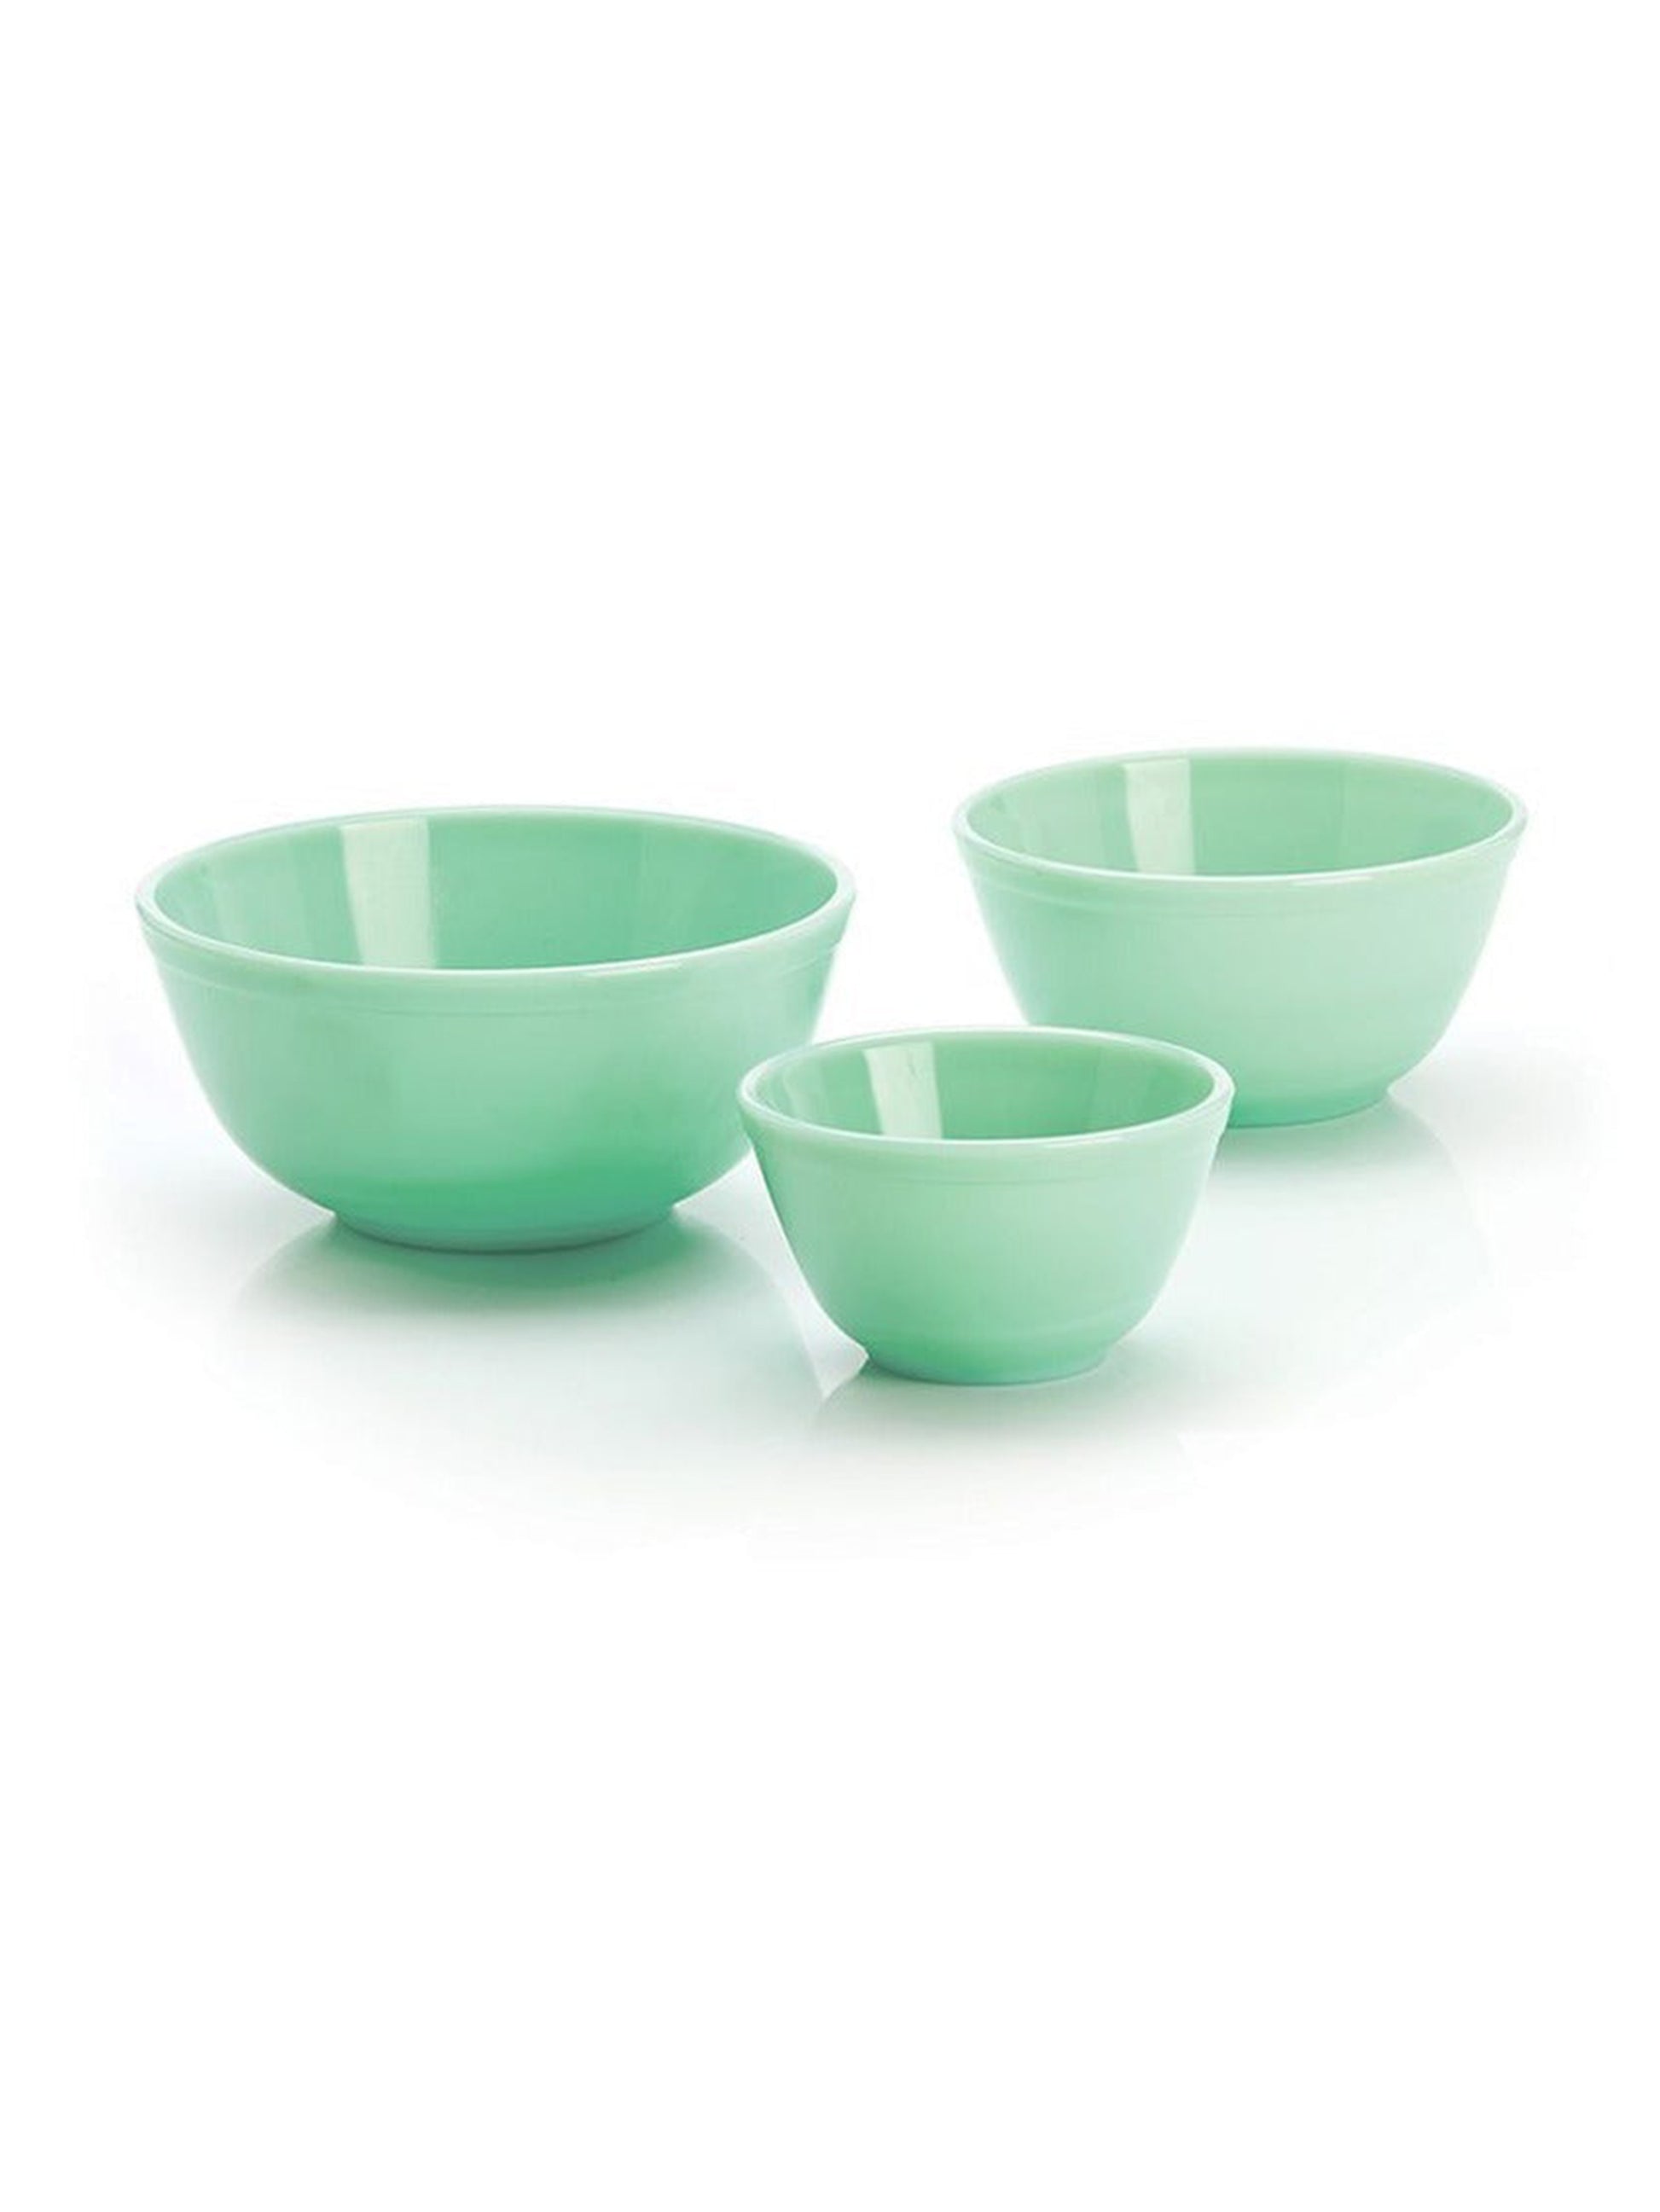 Shop the Mosser Glass 3 Piece Mixing Bowl Set Jadeite at Weston Table